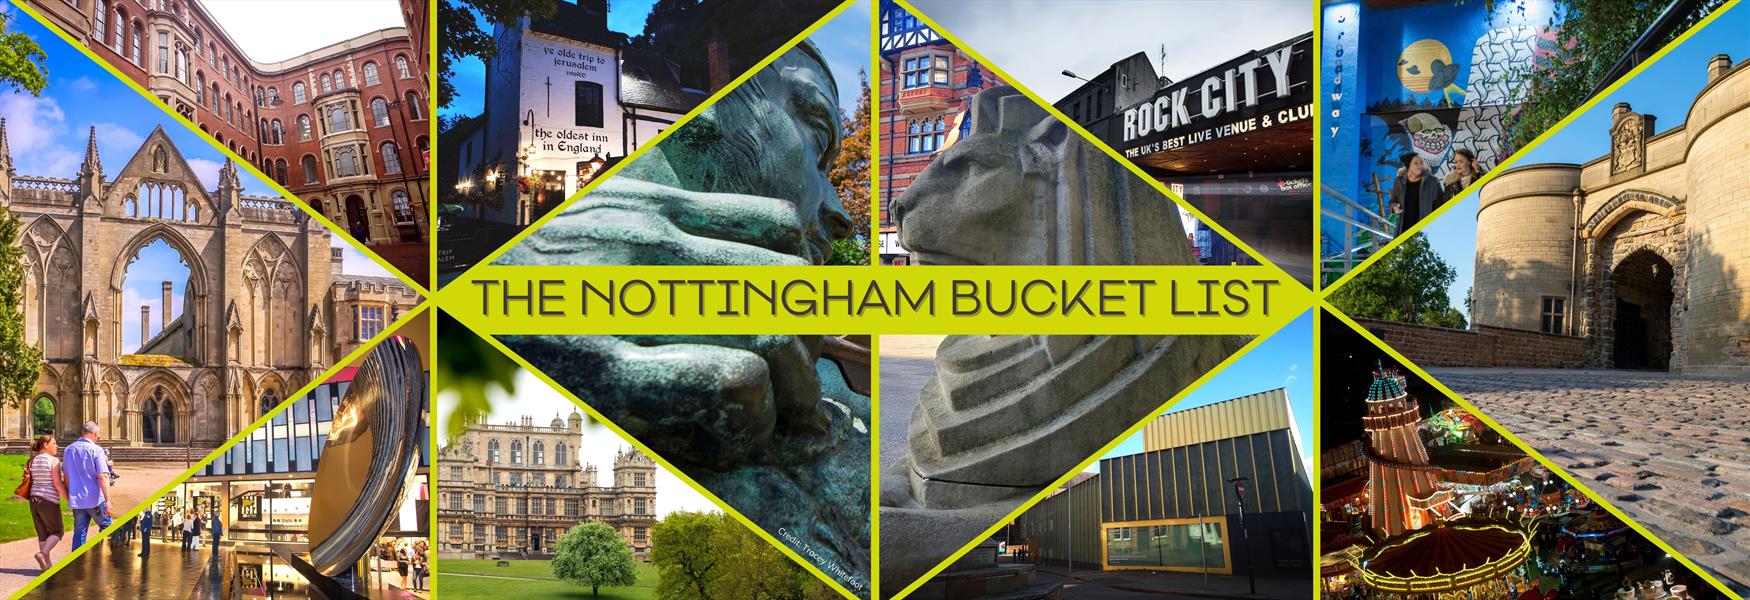 places to visit in beeston nottingham